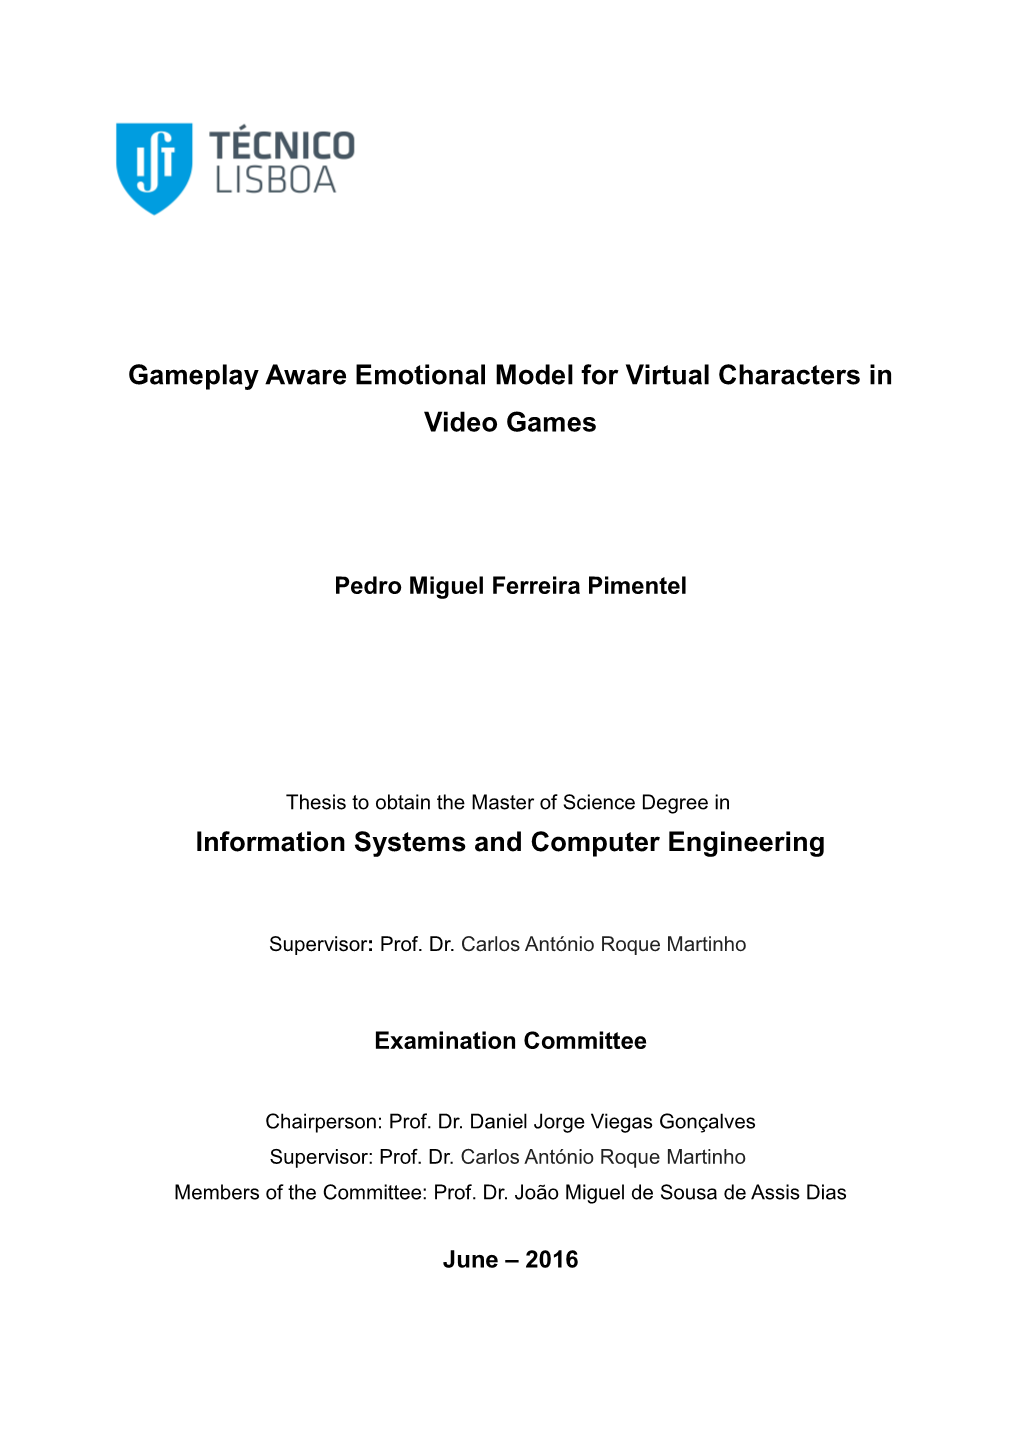 Gameplay Aware Emotional Model for Virtual Characters in Video Games